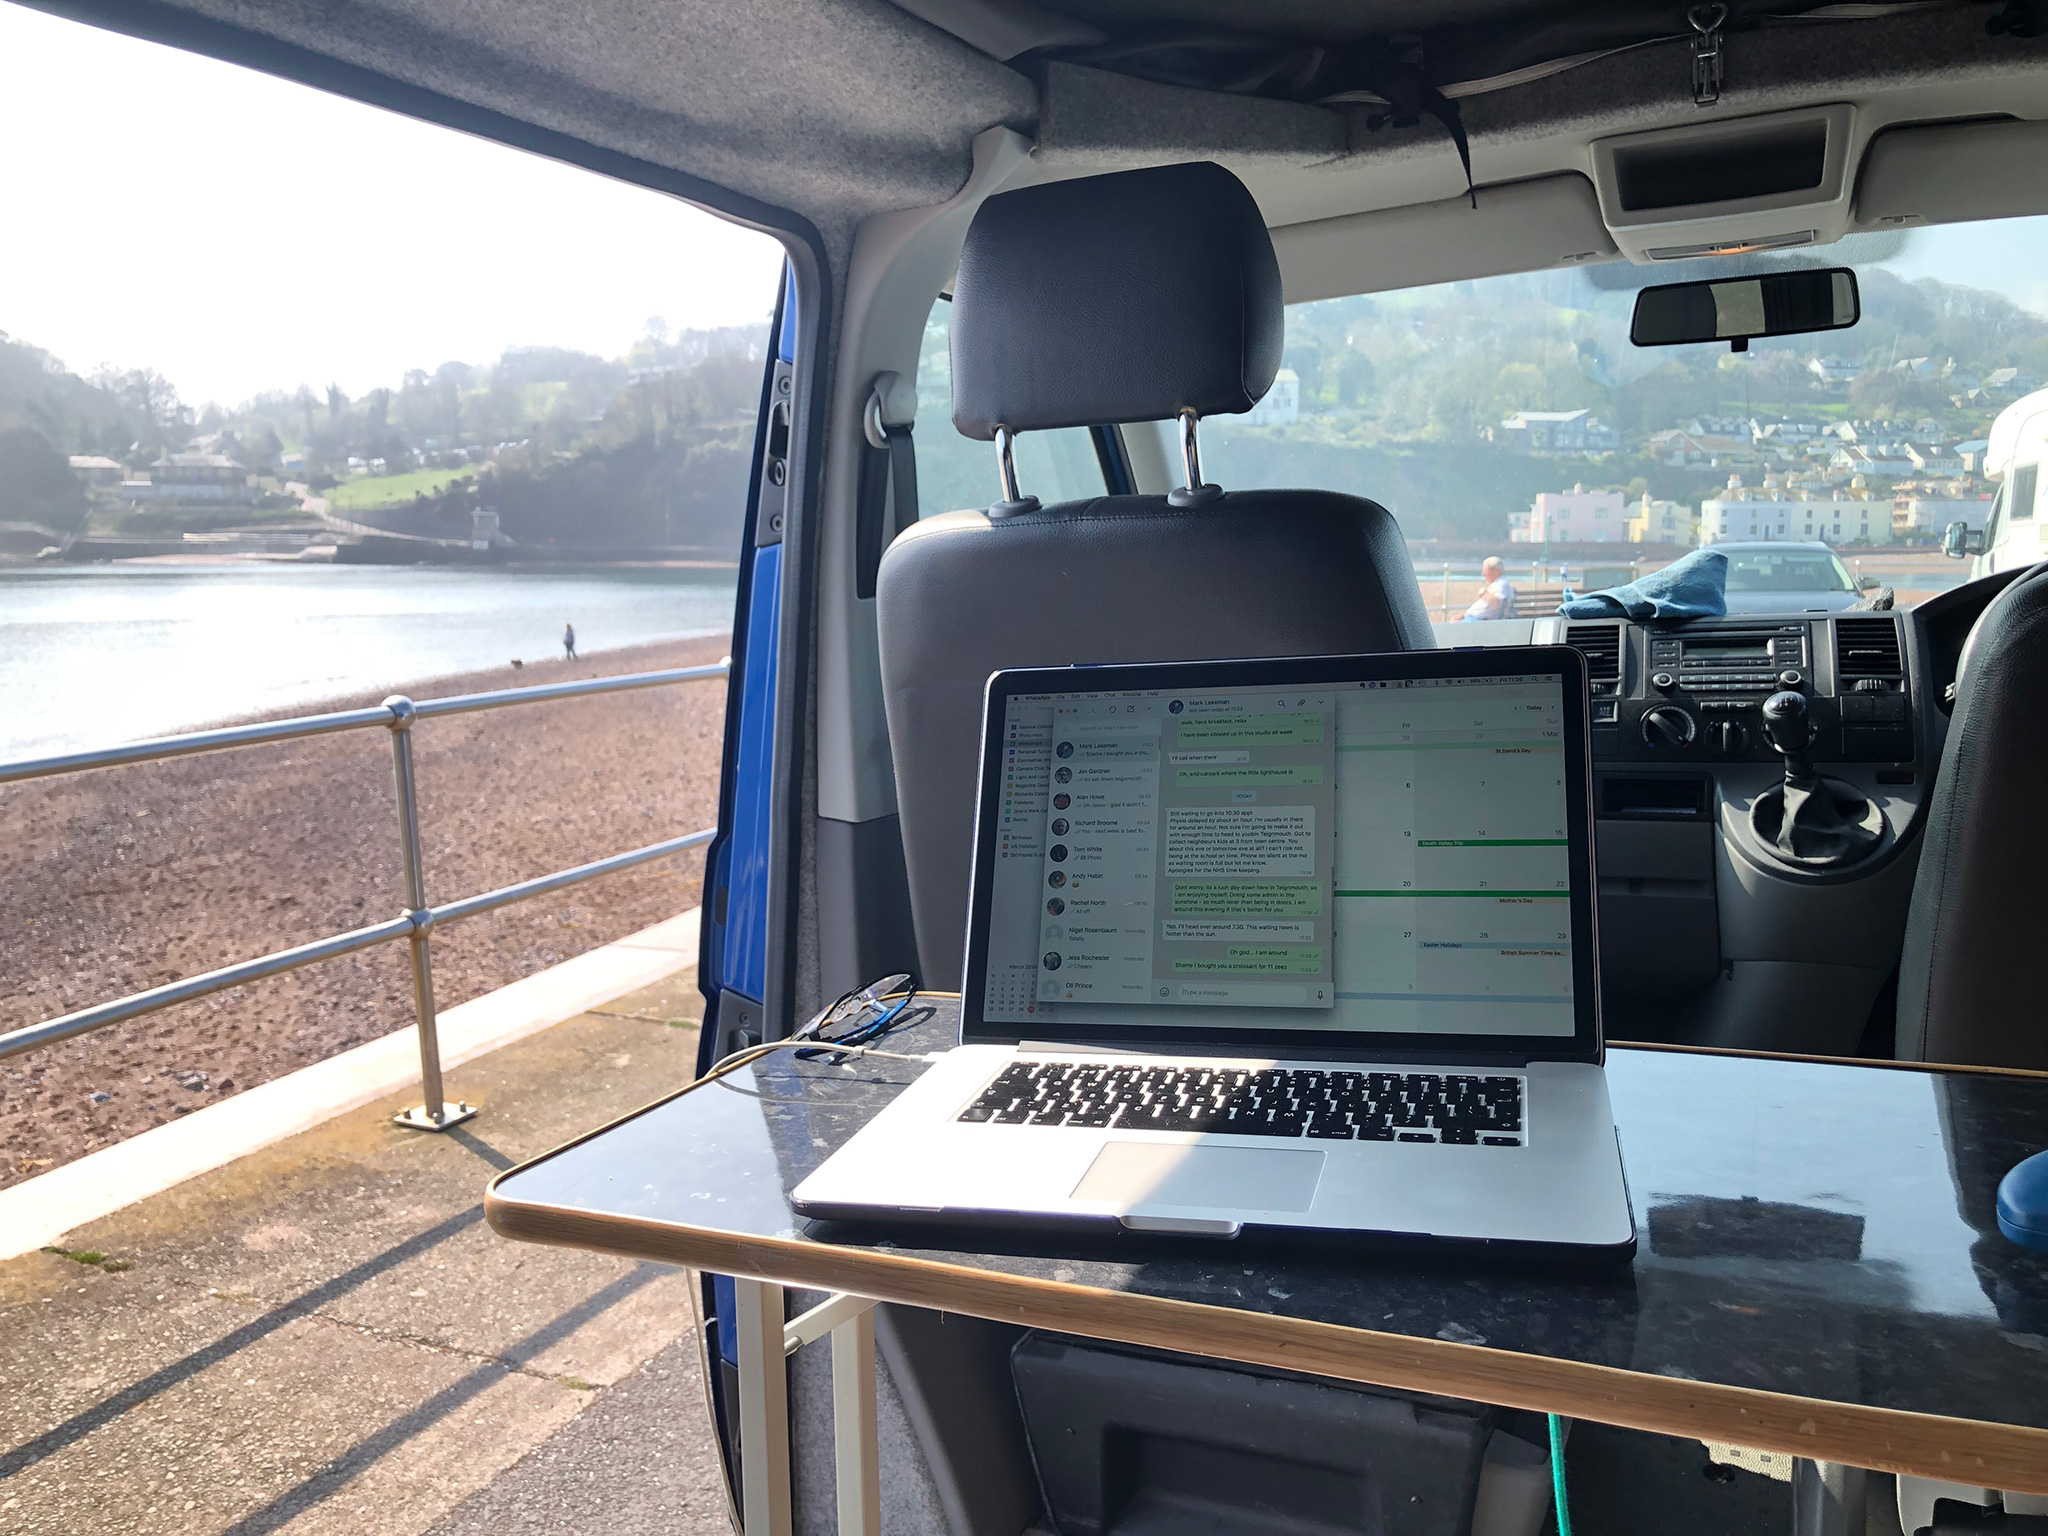 The Mobile Office